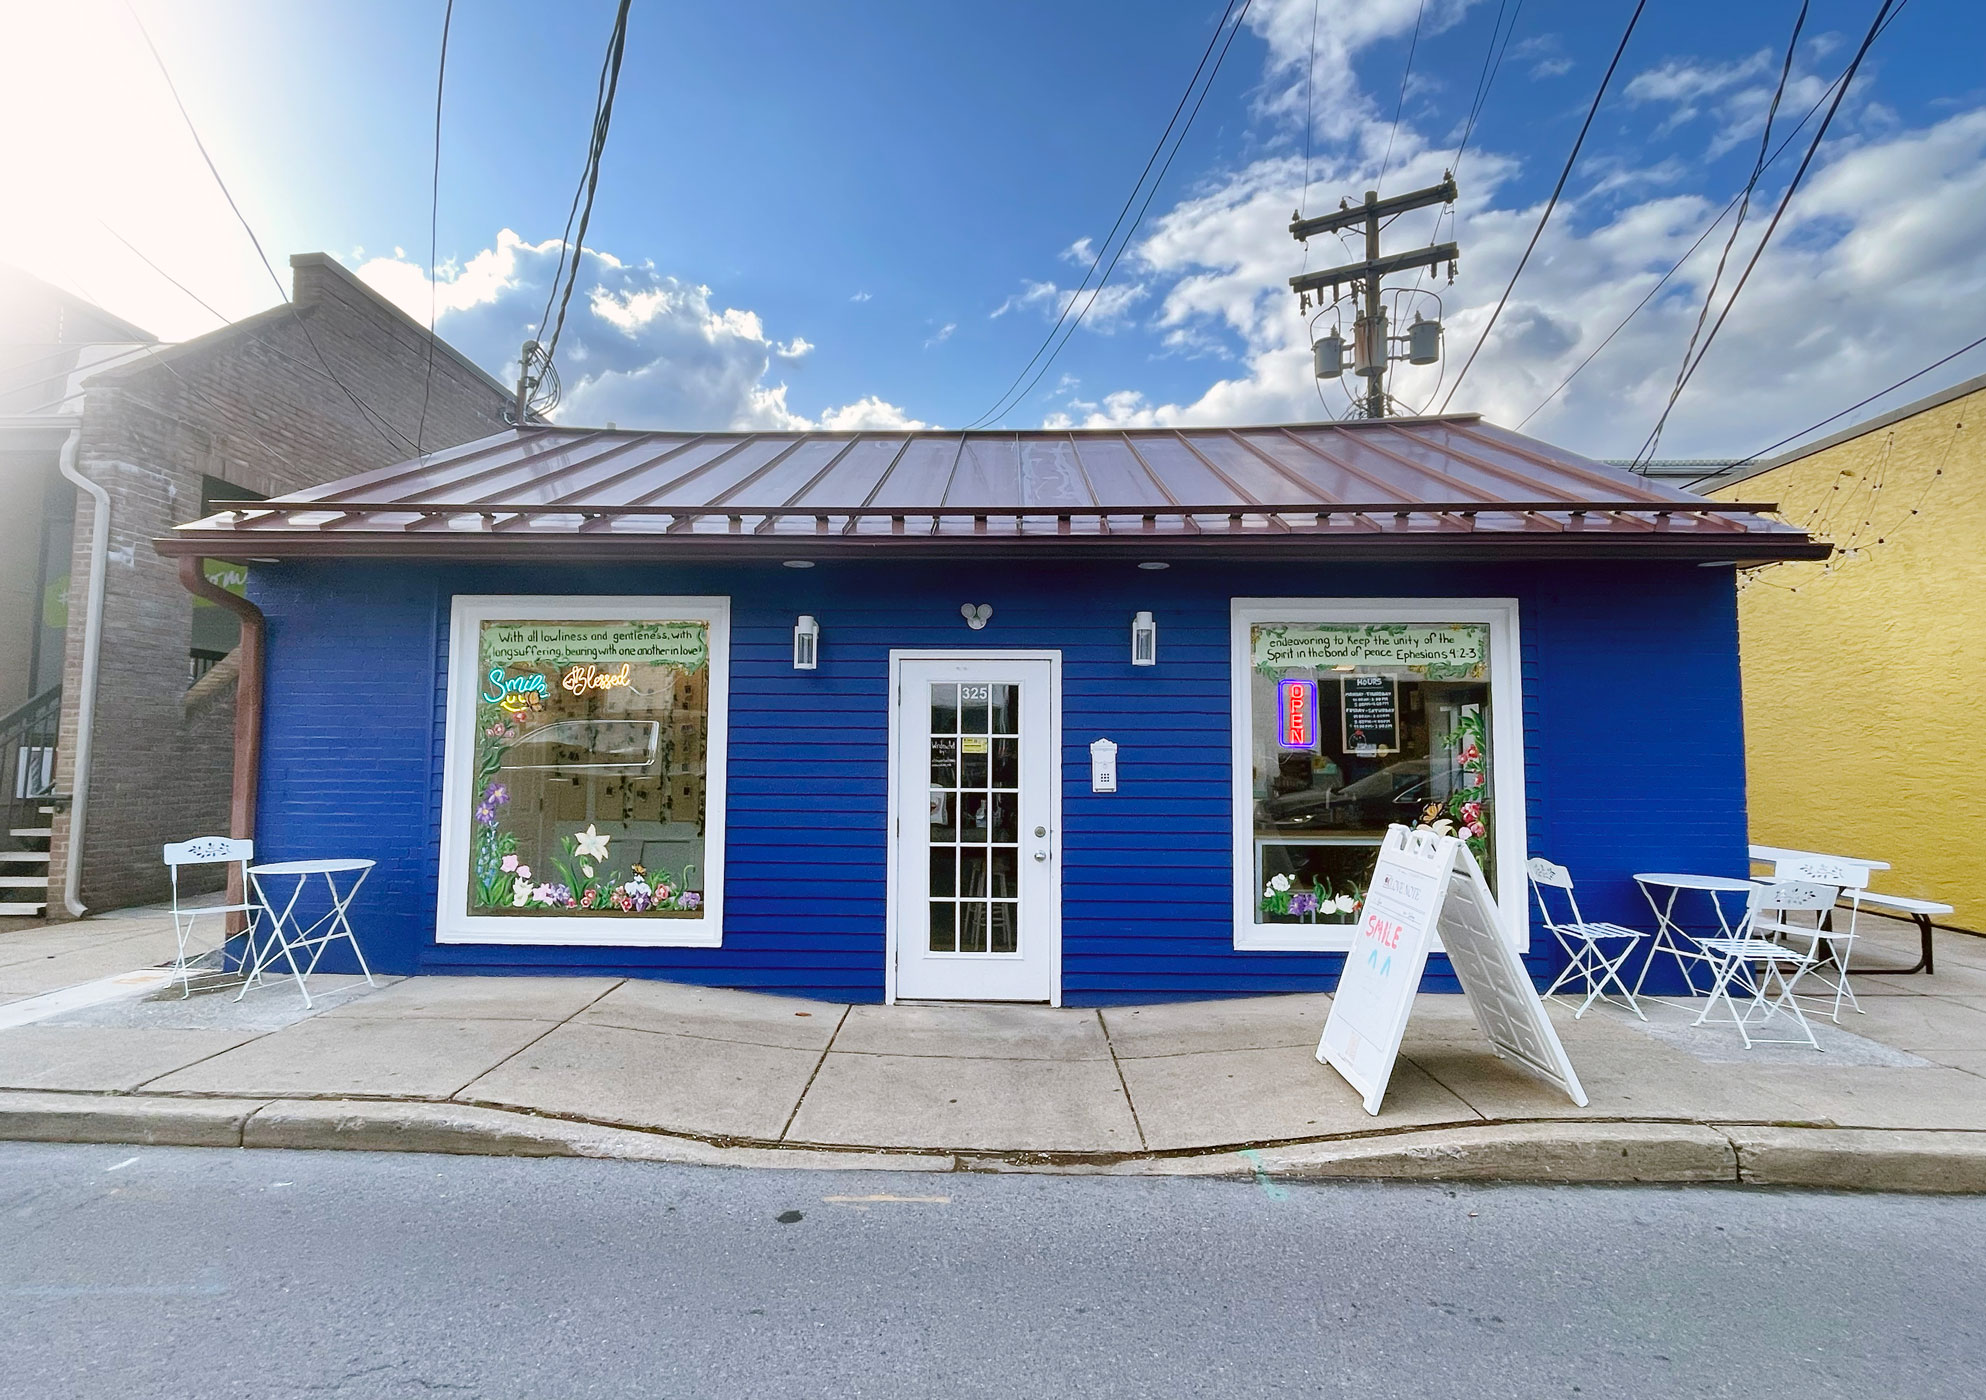 Tasty K exterior photo of small blue building, photo by Nick Sloff '92 A&A